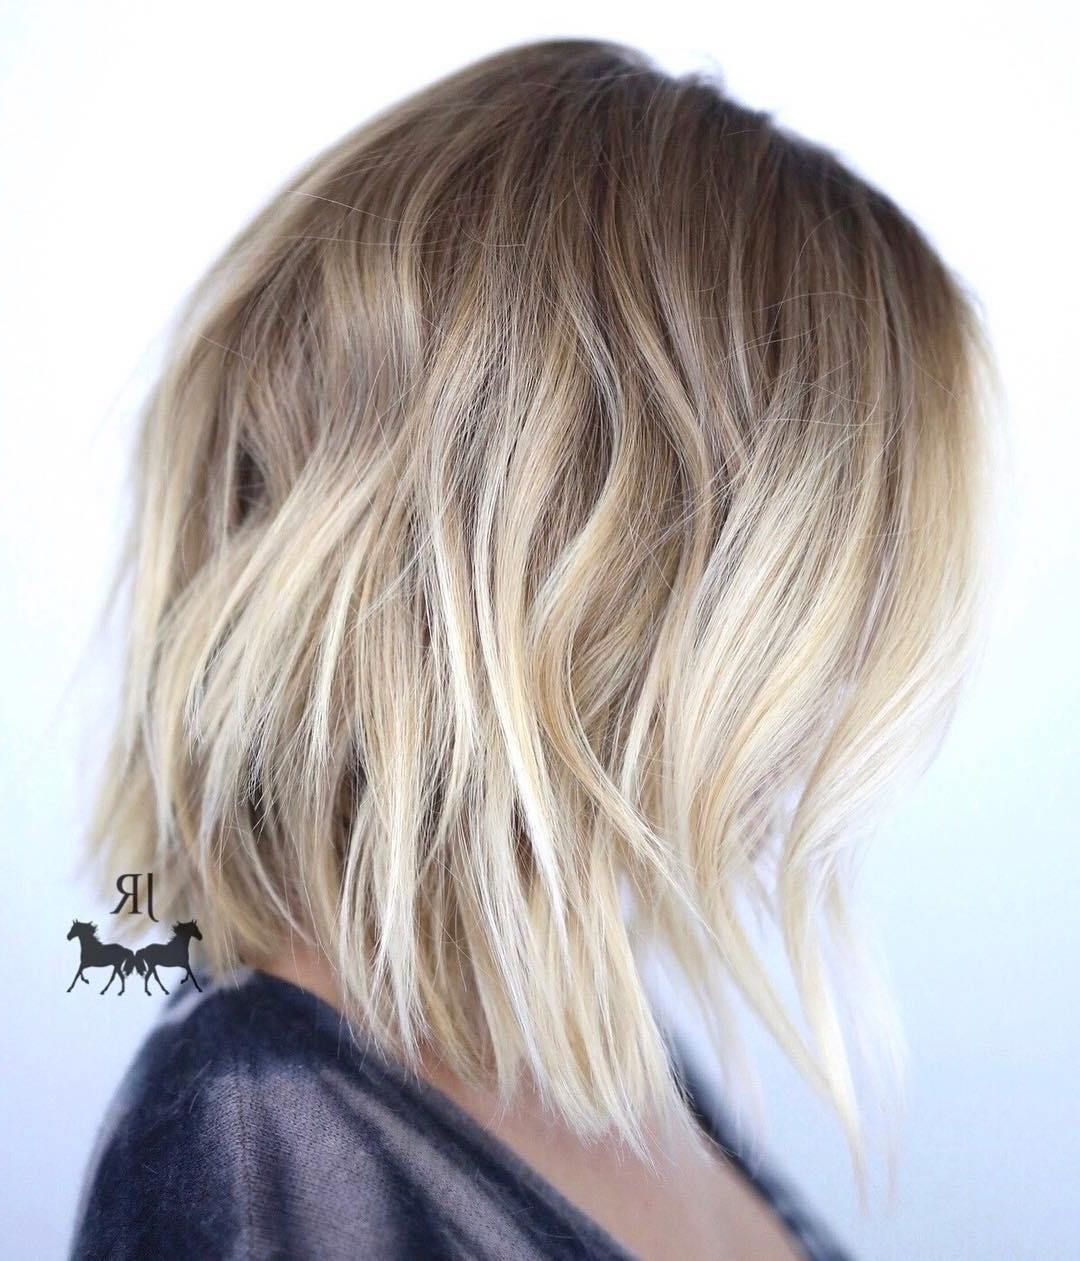 60 Beautiful And Convenient Medium Bob Hairstyles | Medium Bob Hairstyles,  Hair Styles, Short Blonde Hair Inside Most Recent Shoulder Length Blonde Bob Haircuts (View 5 of 25)